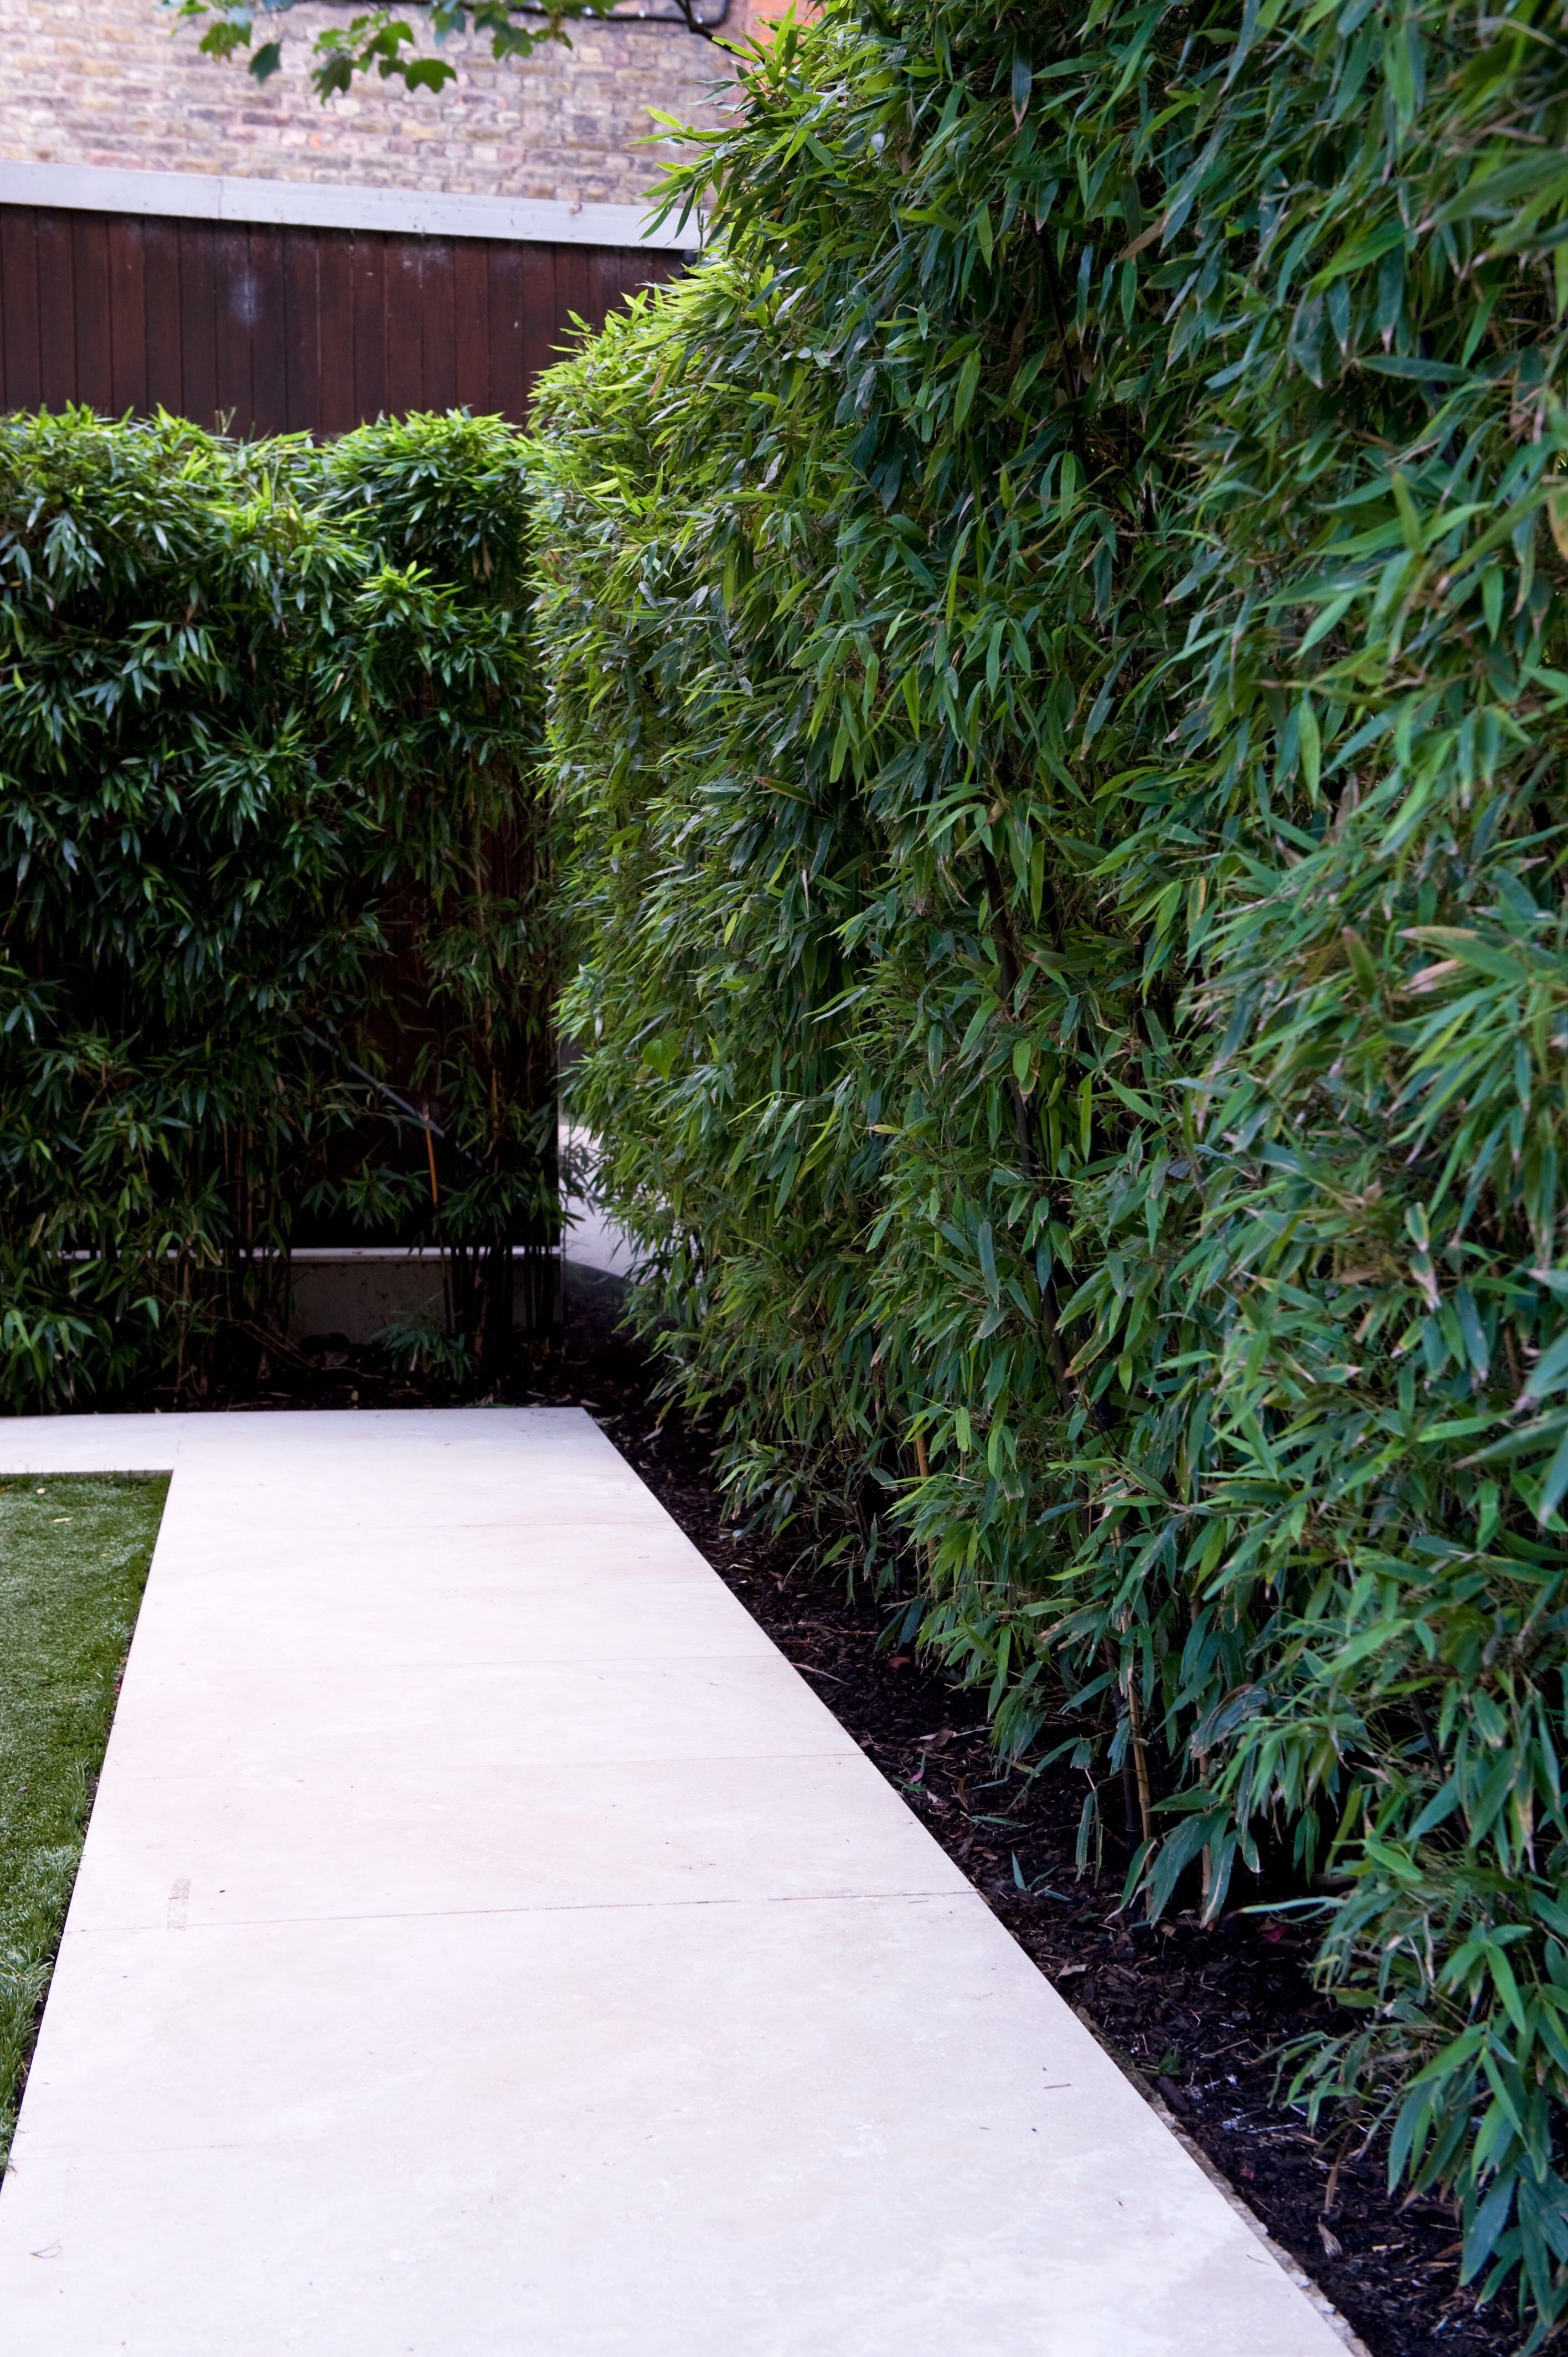 Hedges can give privacy - private garden design